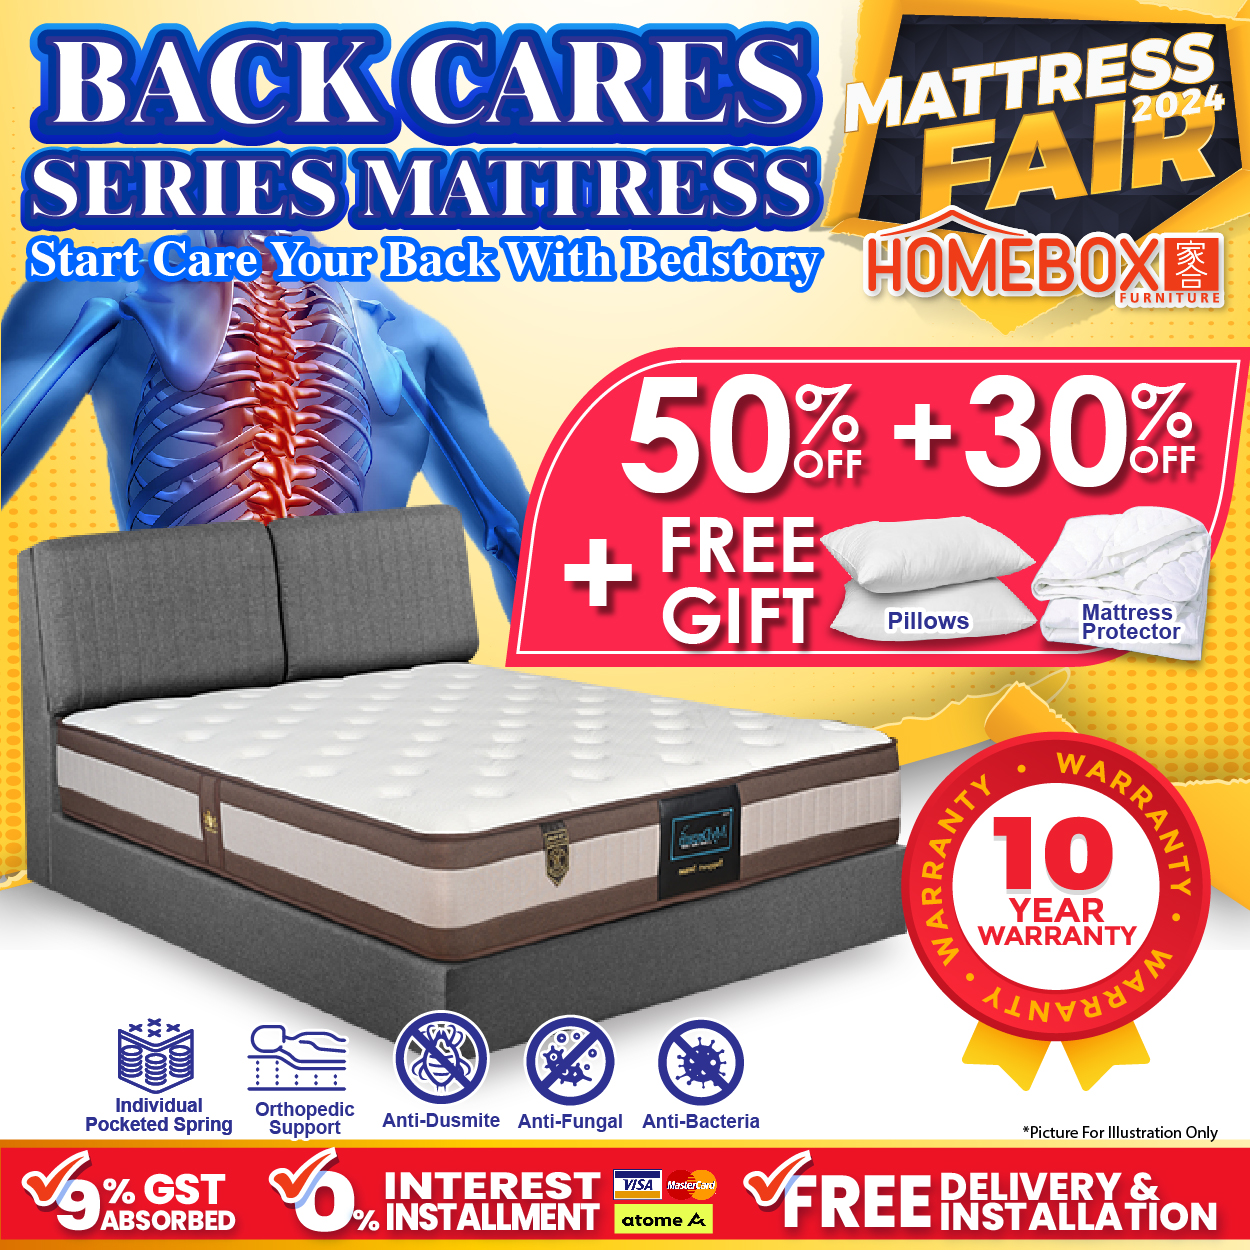 Lobang: Homebox's Biggest Mattress Fair in Aljunied Has Everything At Up To 80% Off From Now Till 5 May 24. Get A Free Mattres Upgrade During The Sale! - 5